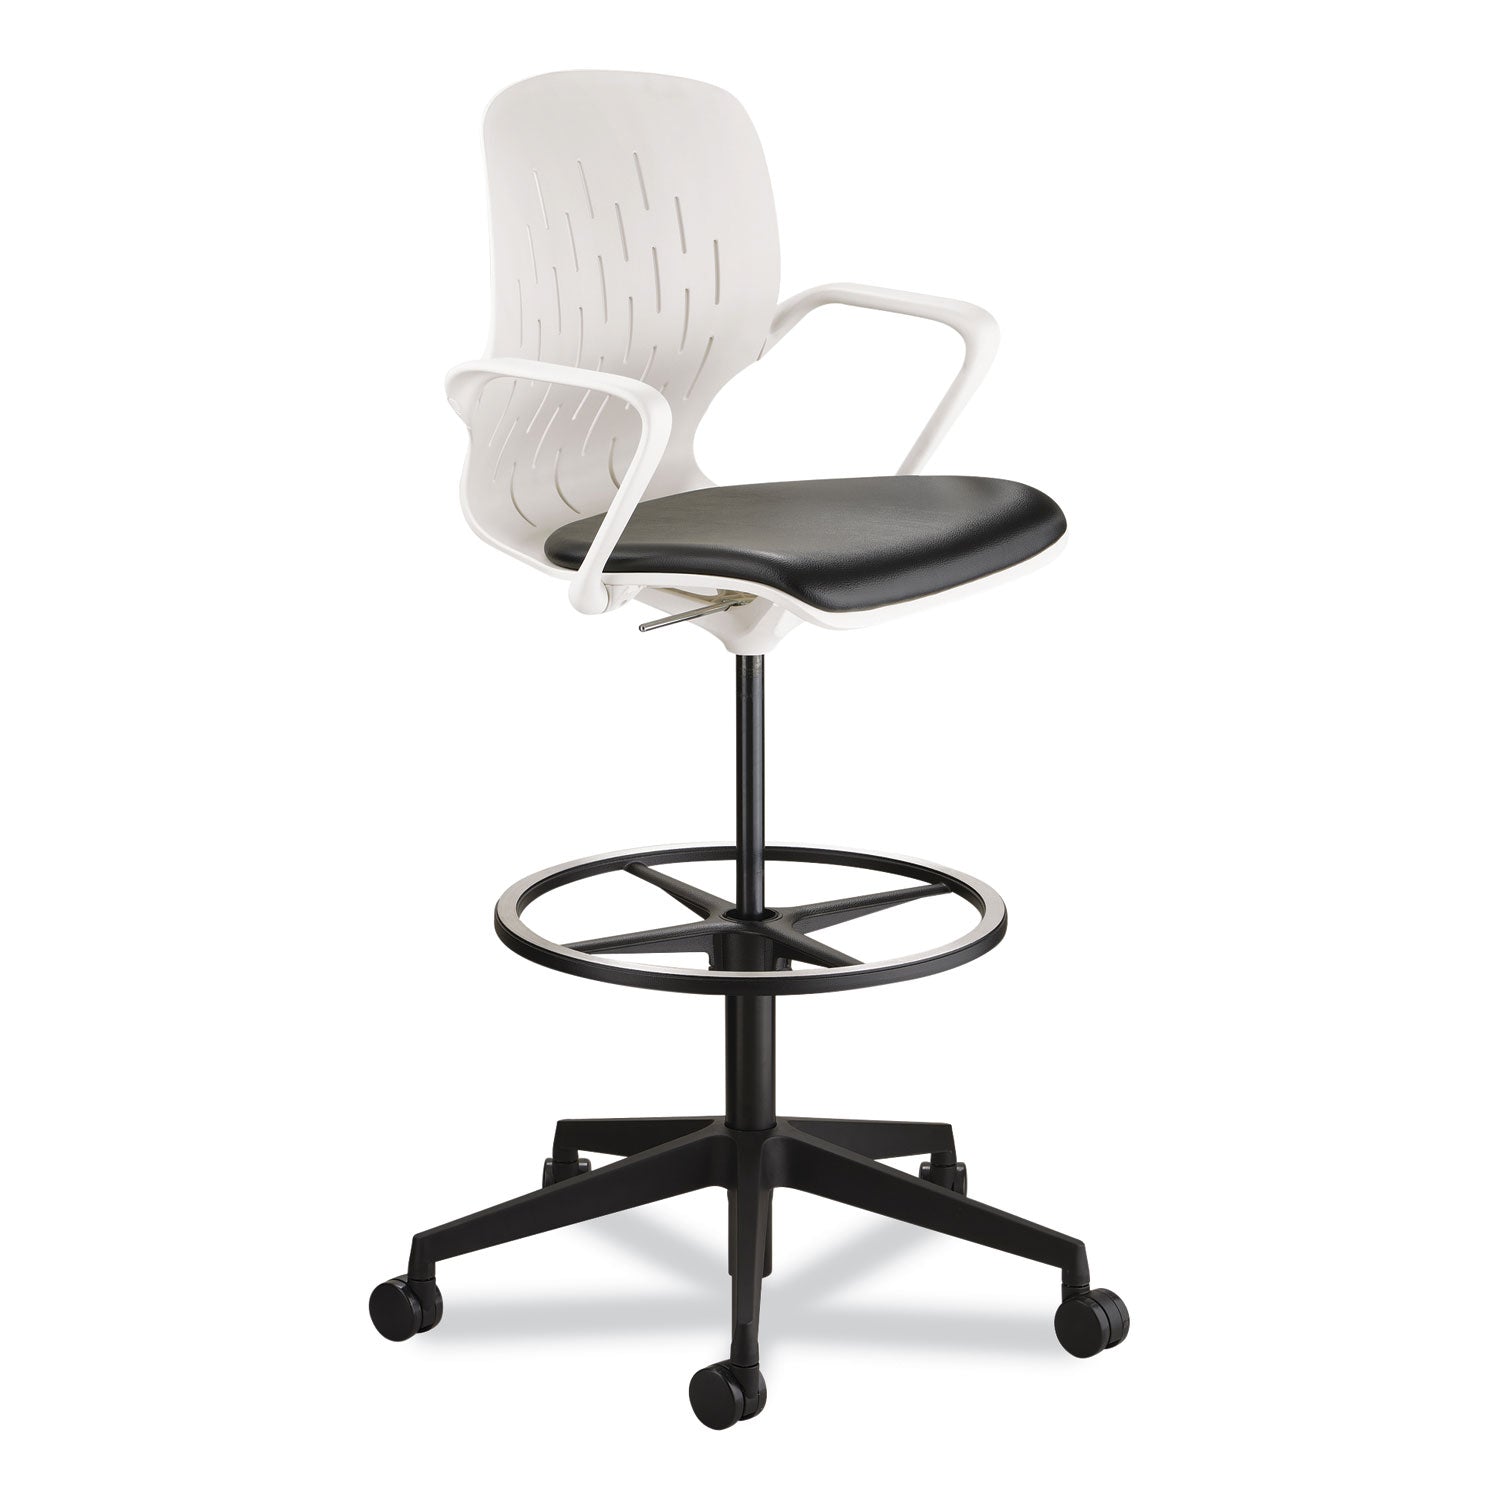 shell-extended-height-chair-max-275-lb-22-to-32-high-black-white-seat-white-back-black-base-ships-in-1-3-business-days_saf7014wh - 1